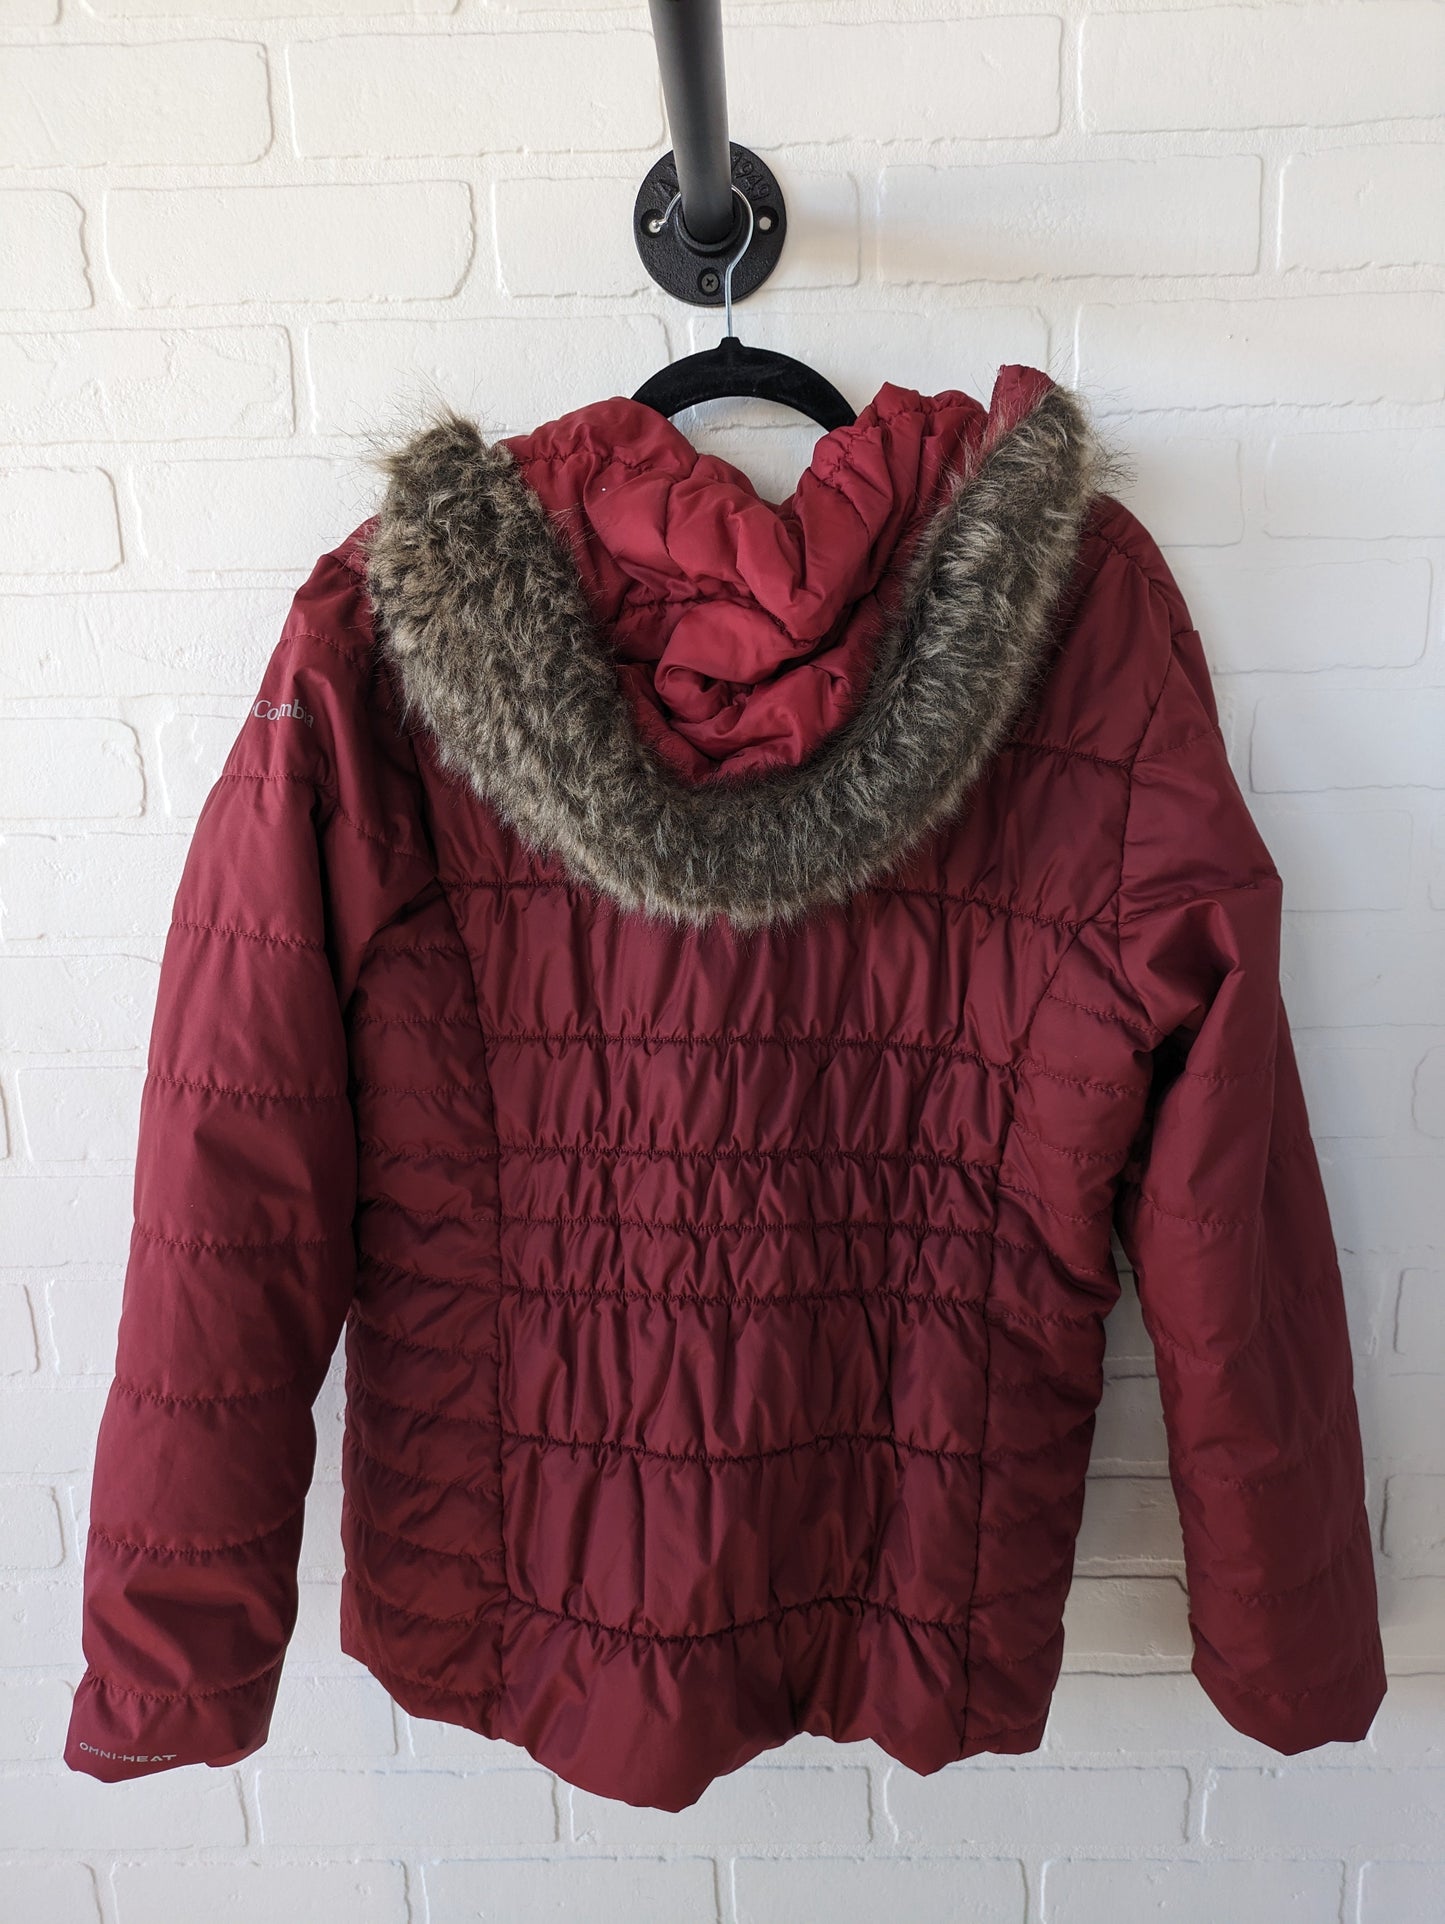 Coat Puffer & Quilted By Columbia  Size: L